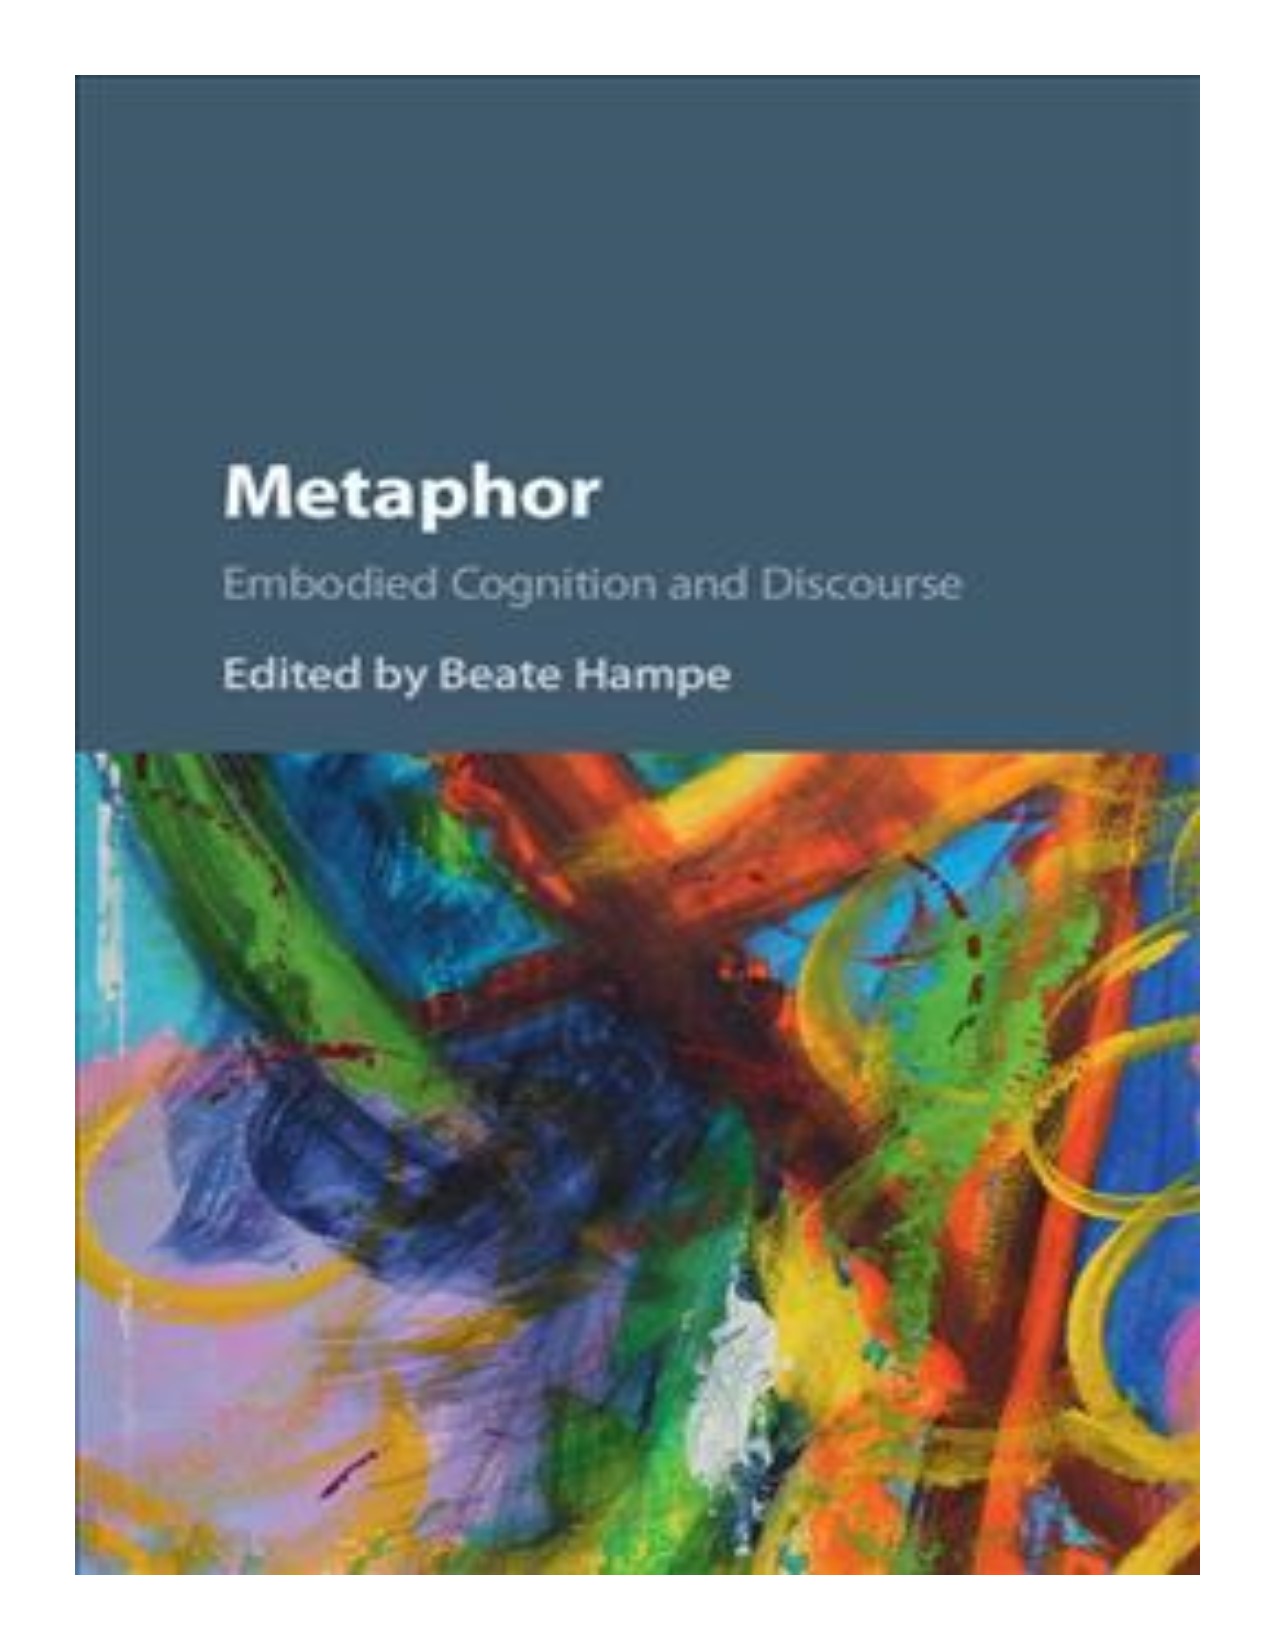 Metaphor embodied cognition and discourse